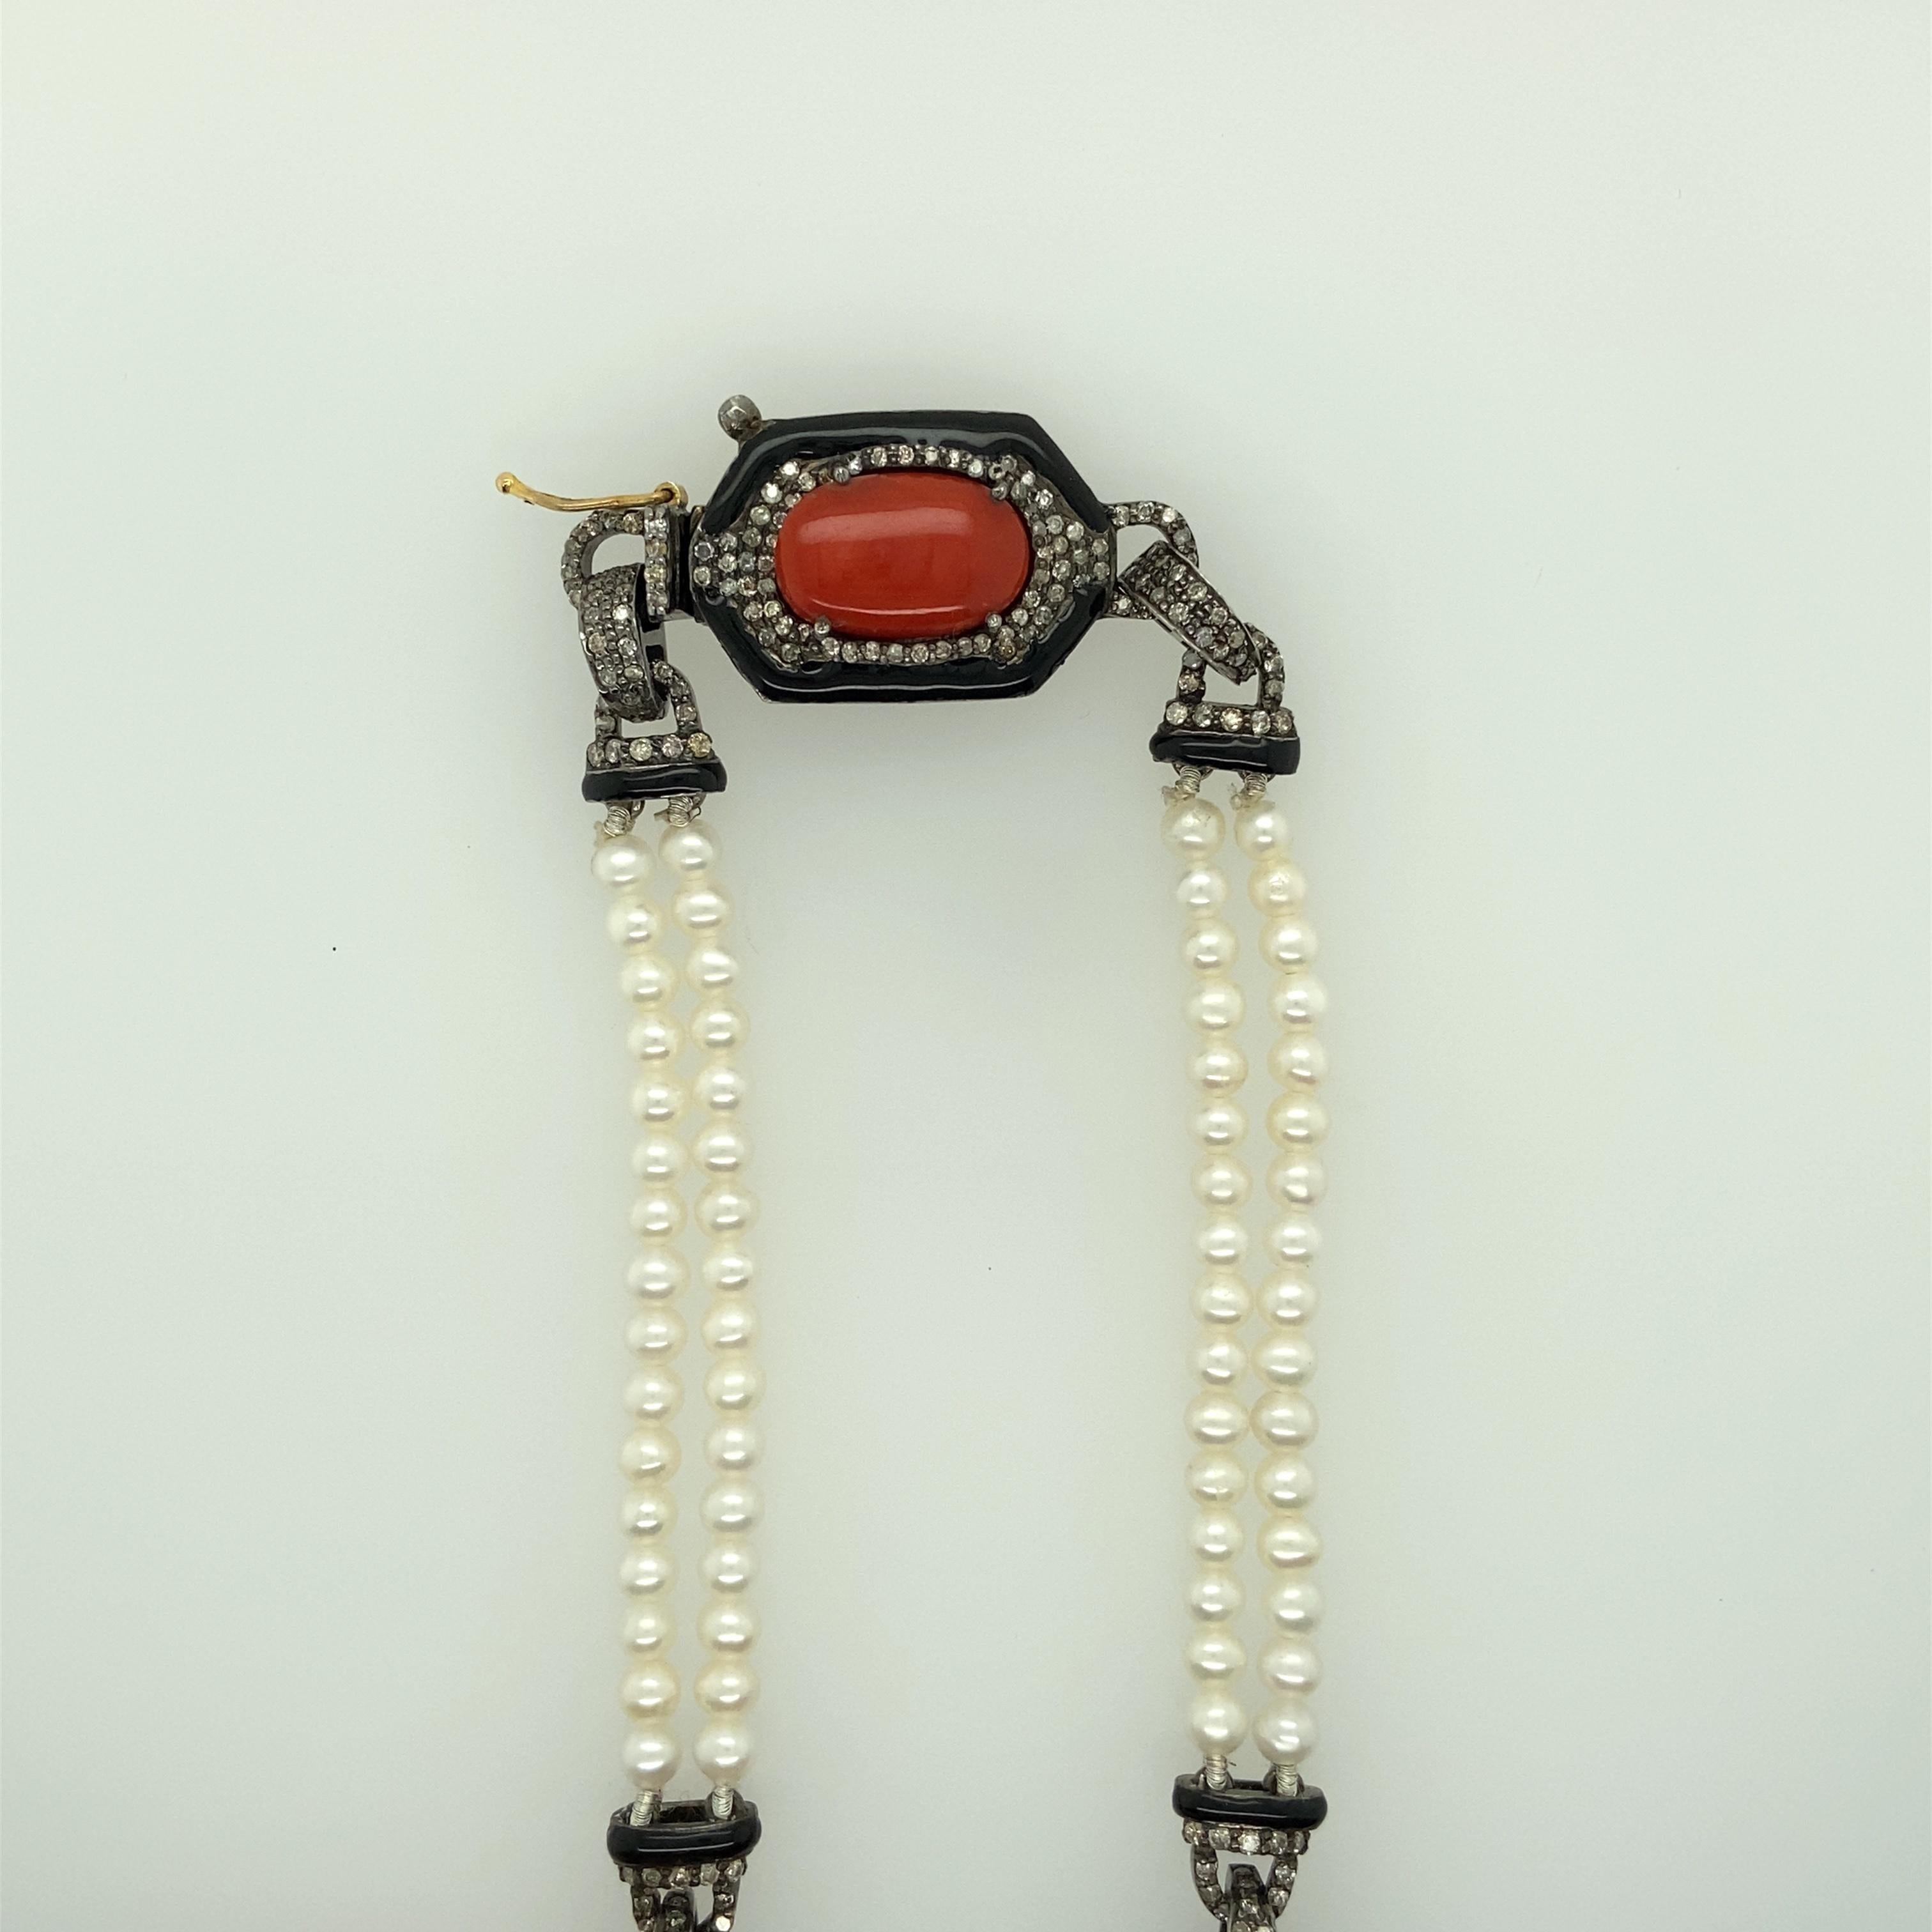 One Antiqued finished sterling silver and 14 karat yellow gold (stamped 925 14K) vintage necklace featuring eight oval shaped cabochon coral stones measuring 13x8.75, 15.5x9, 16x11, and 19x11.5.  The necklace also features approximately 4.0 carats